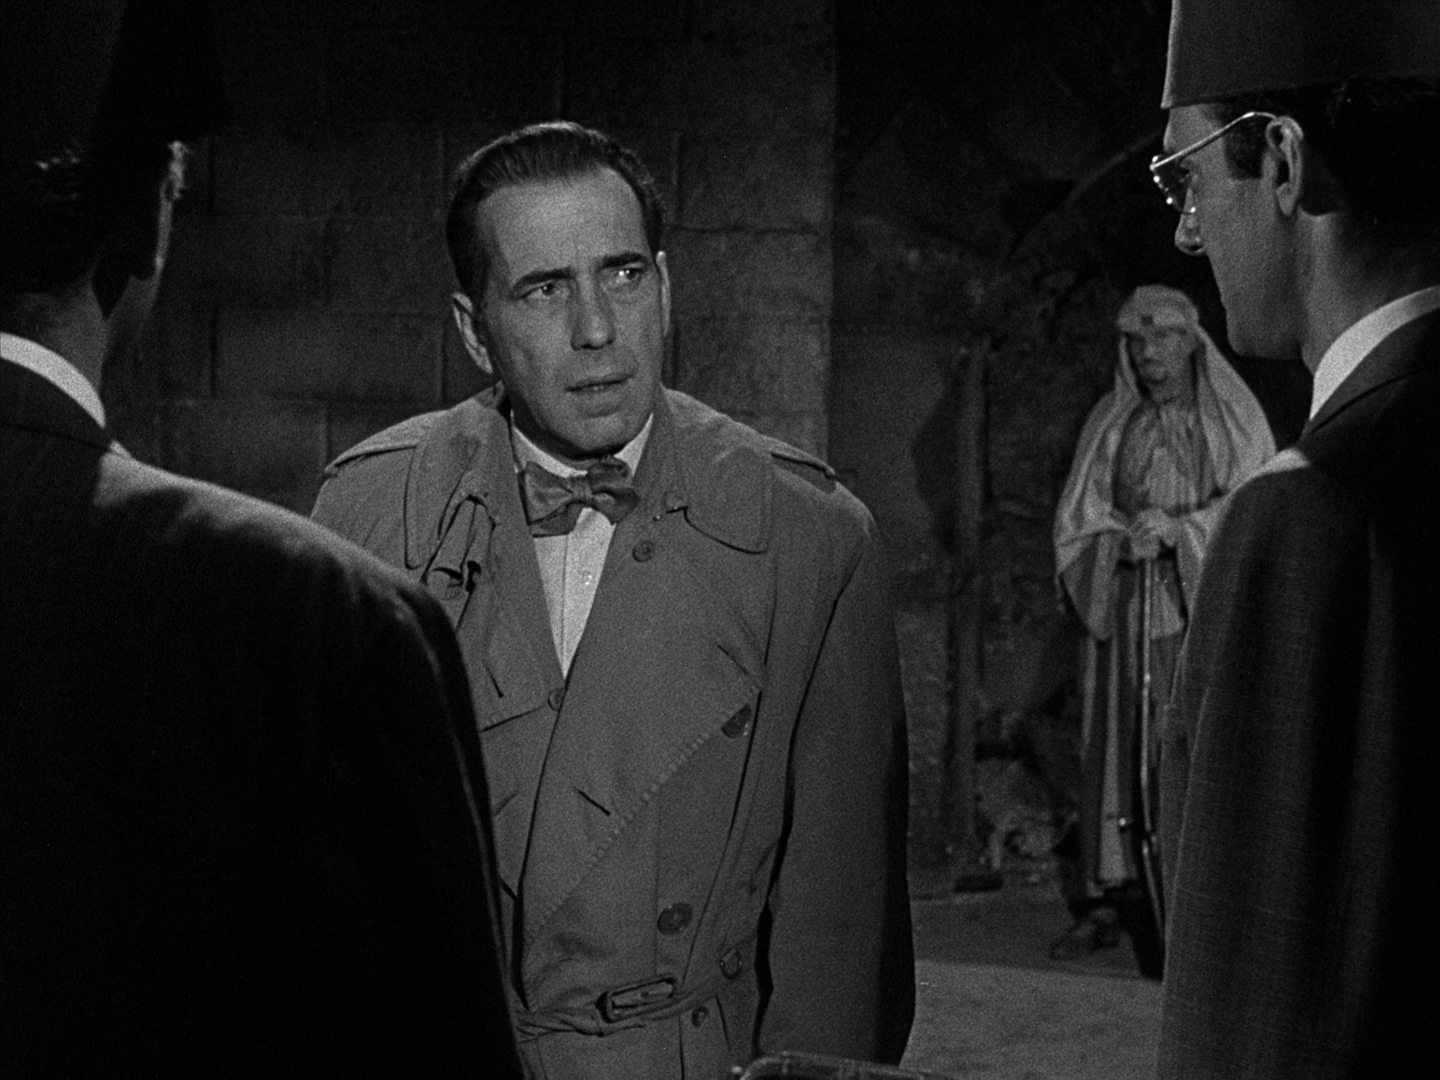 Black and white scene with Humphrey Bogart as a smuggler in a conversation in dubious surroundings.